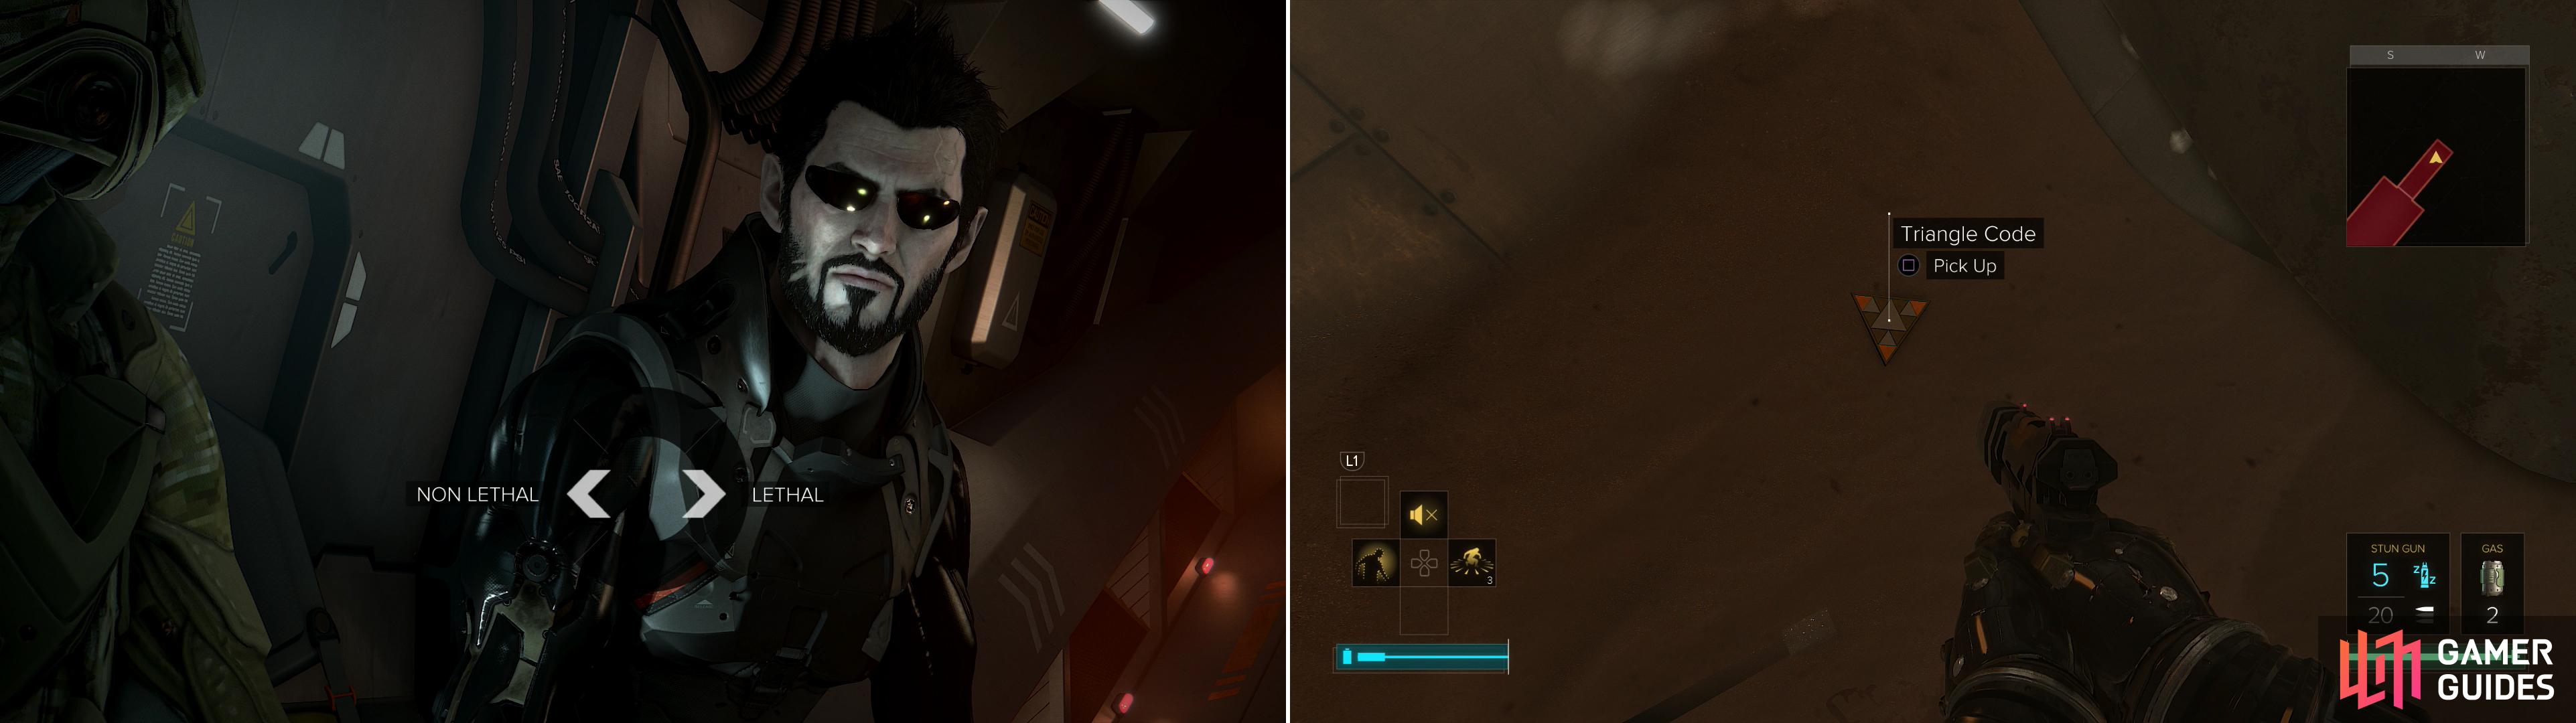 Choose your weapon preference - lethal or non-lethal (left). Search an airshaft to find Triangle Code #1 (right).